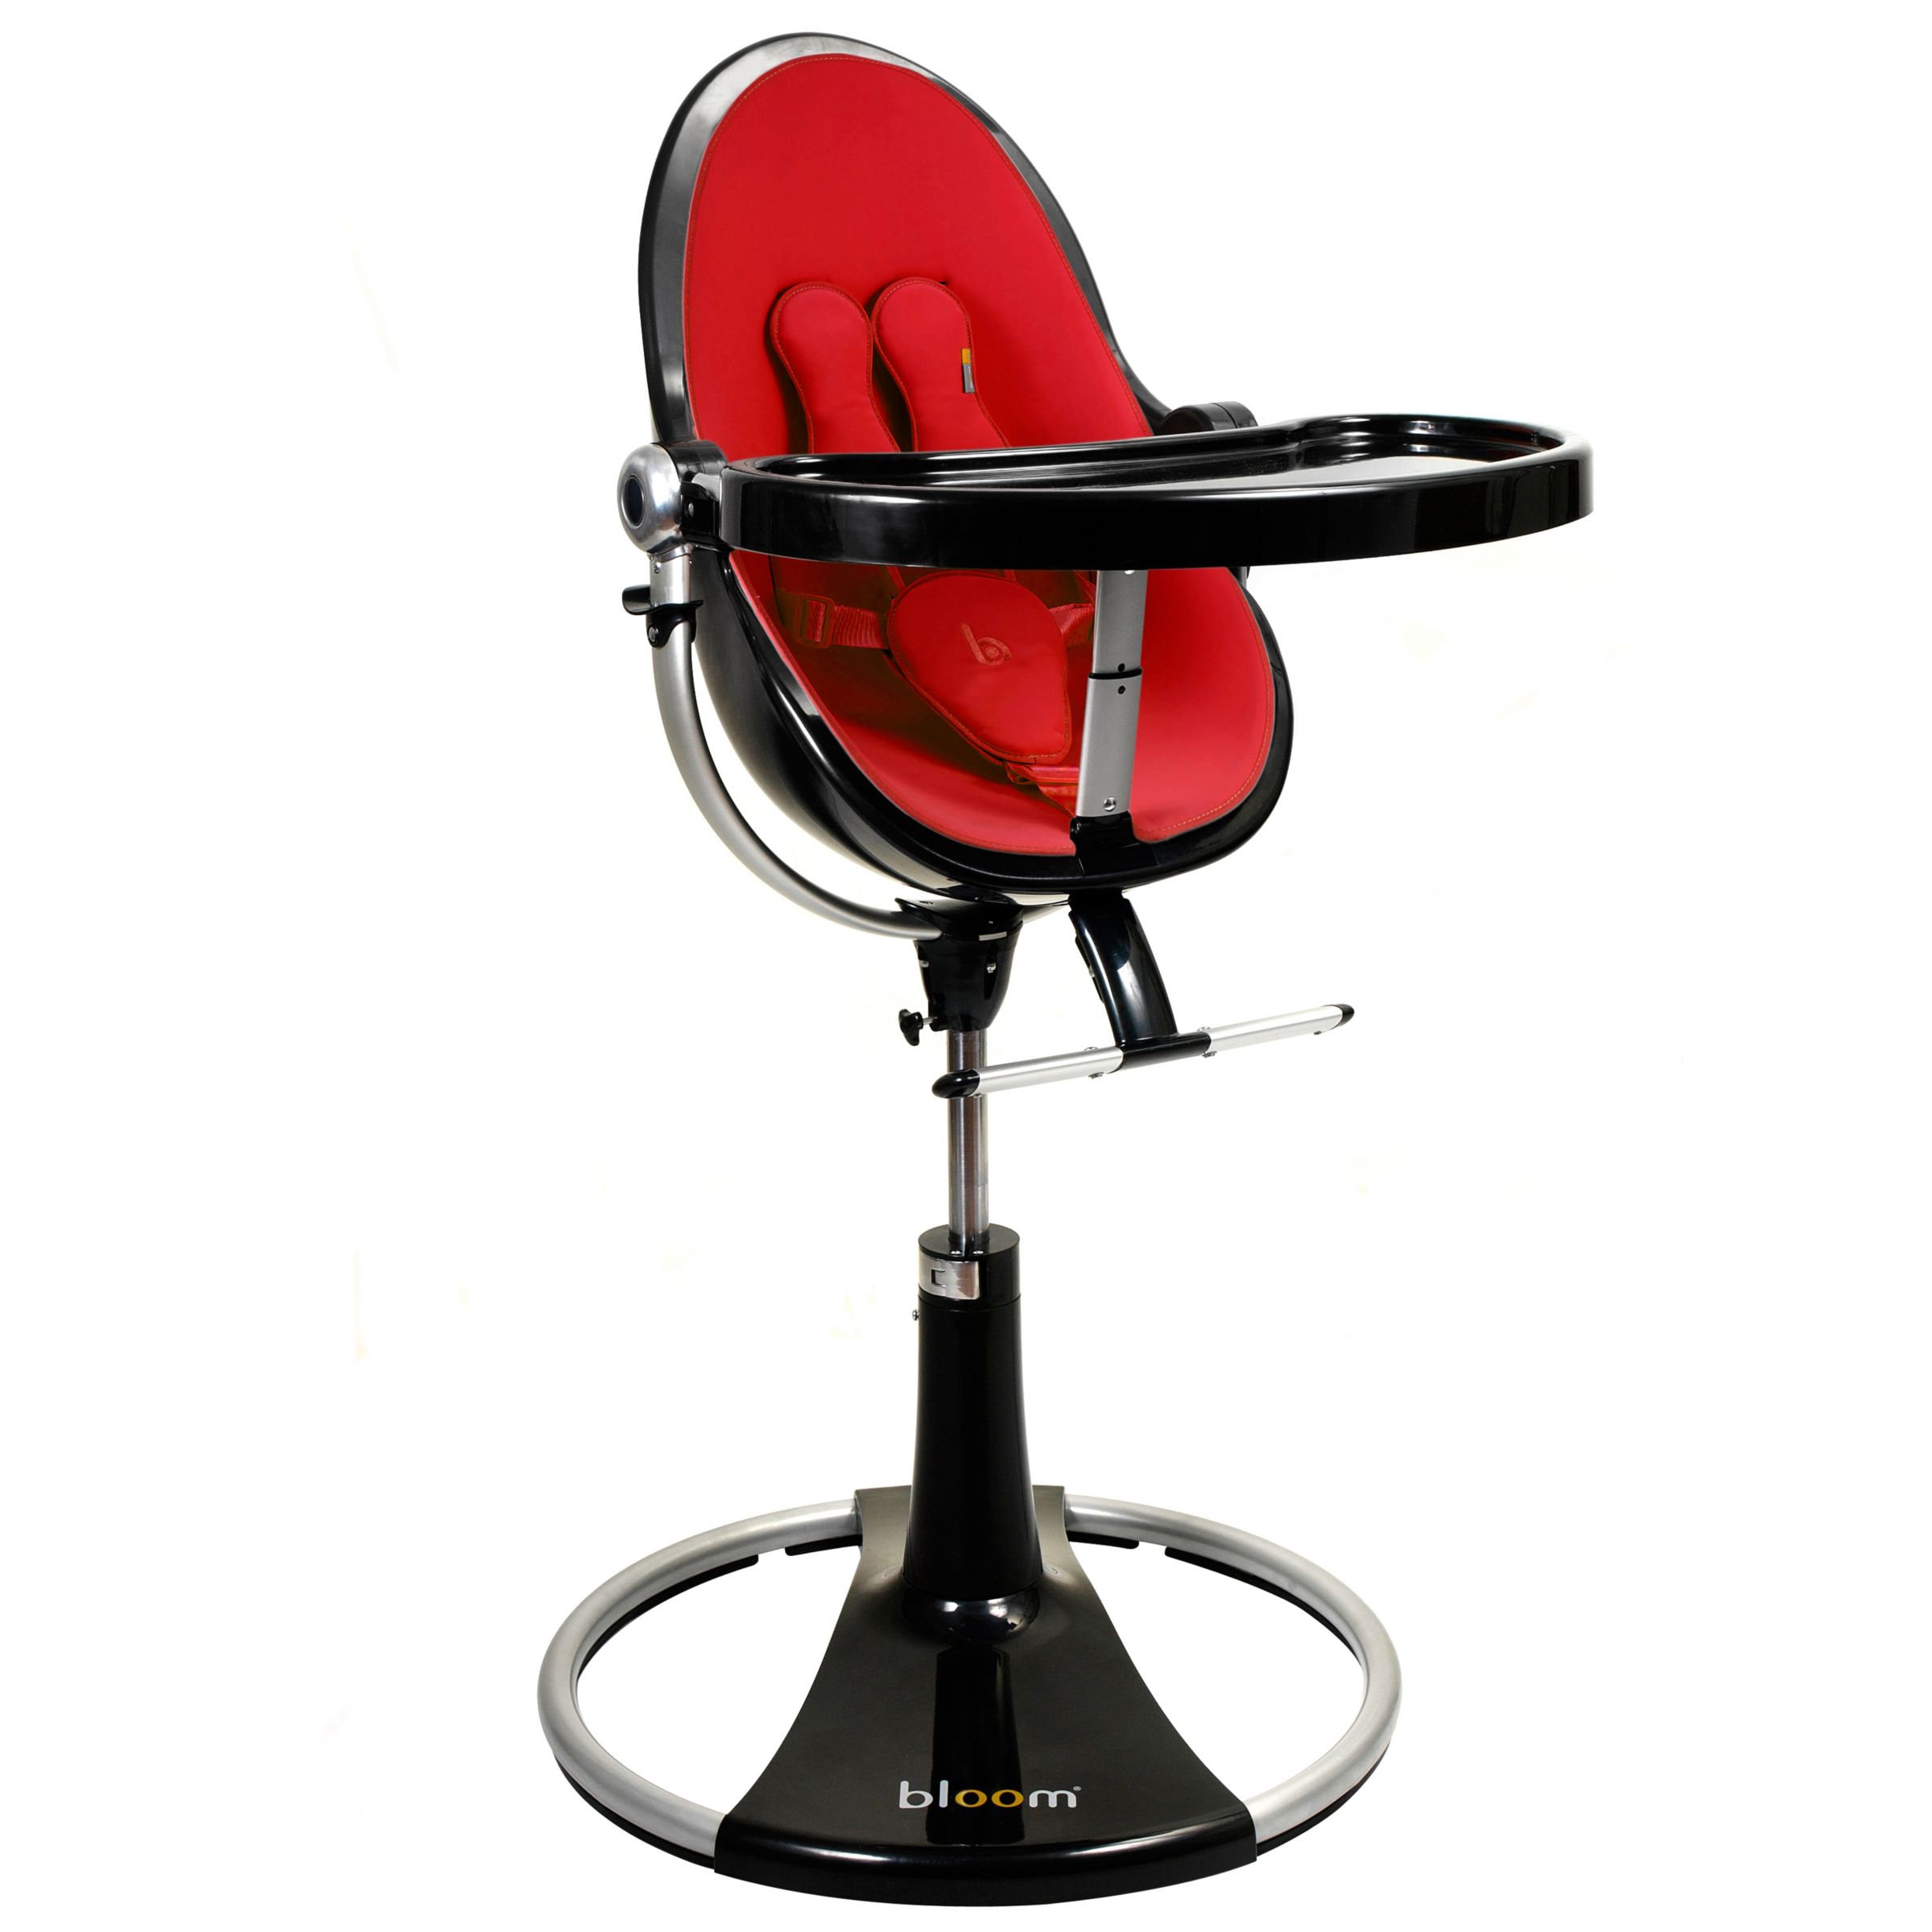 bloom Fresco Loft Contemporary Leatherette Baby Chair, Ebony Black with Rock Red at John Lewis